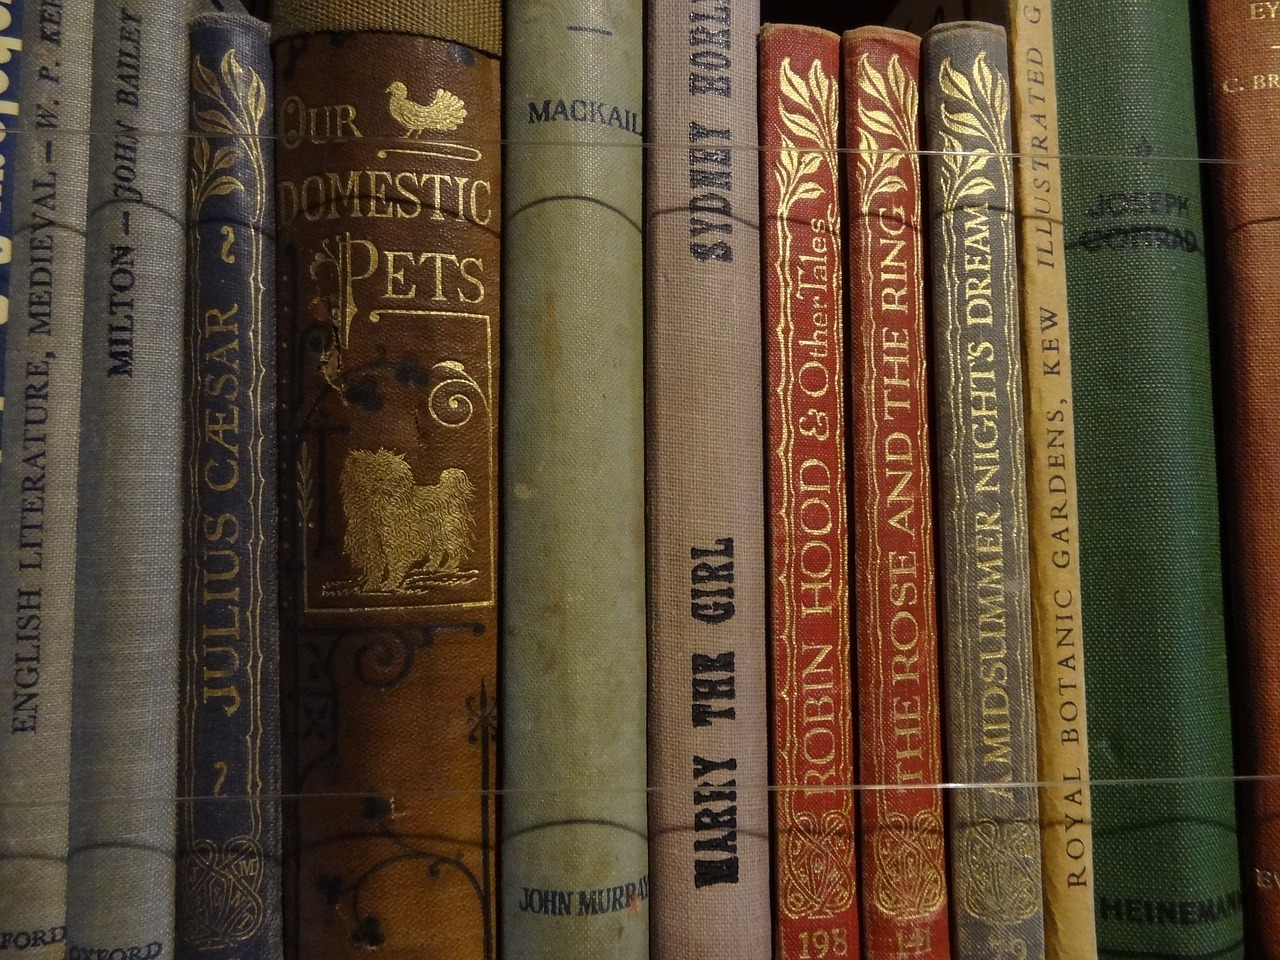 A photograph of antique books to demonstrate the literary scene and bookshops of York.